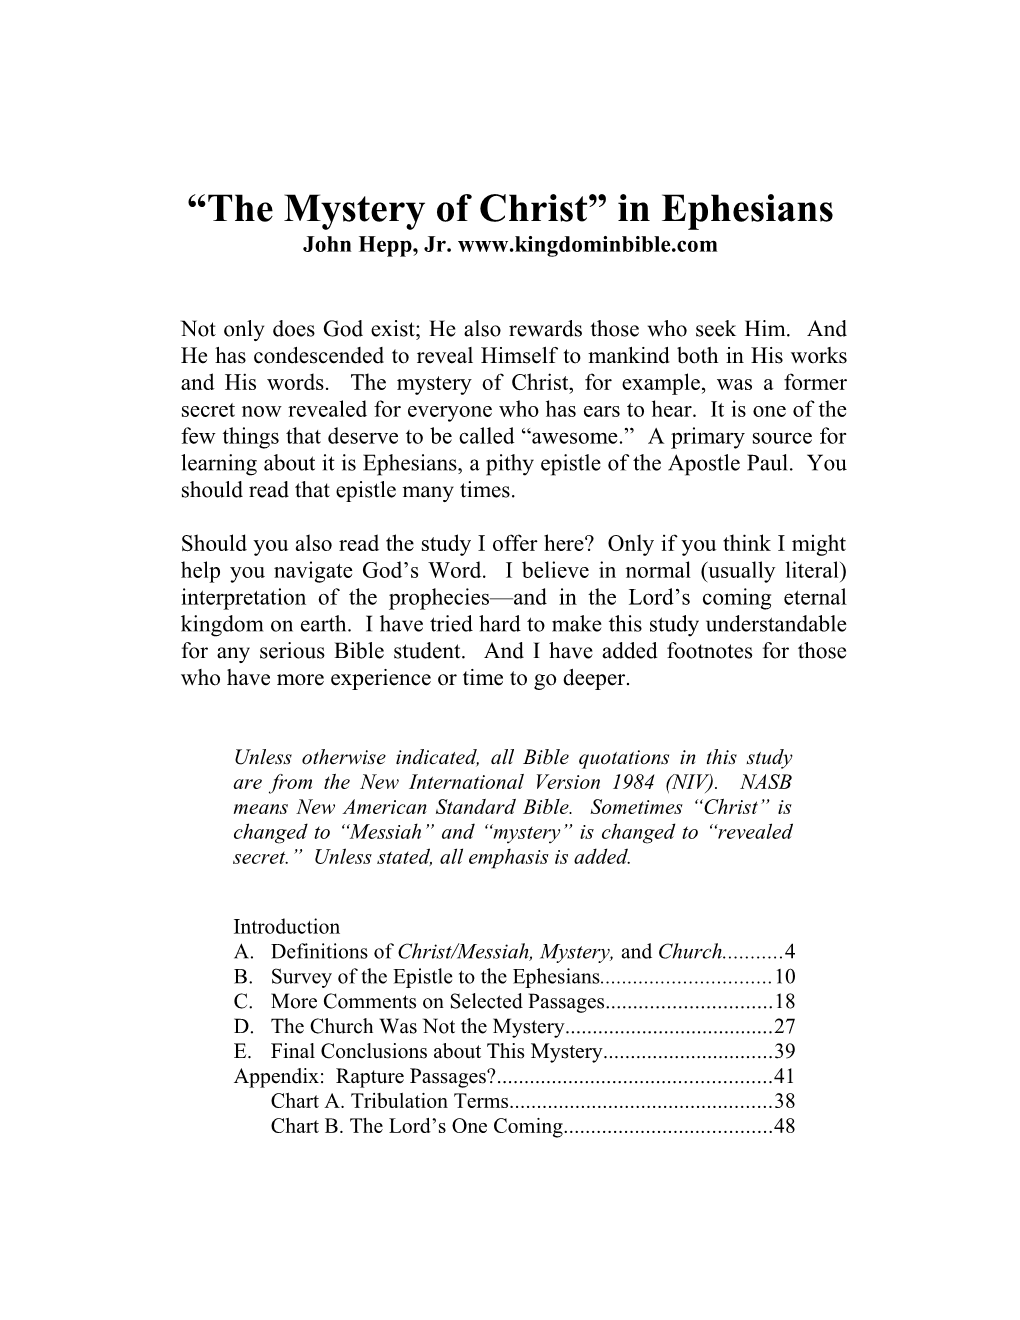 The Mystery of Messiah in Ephesians